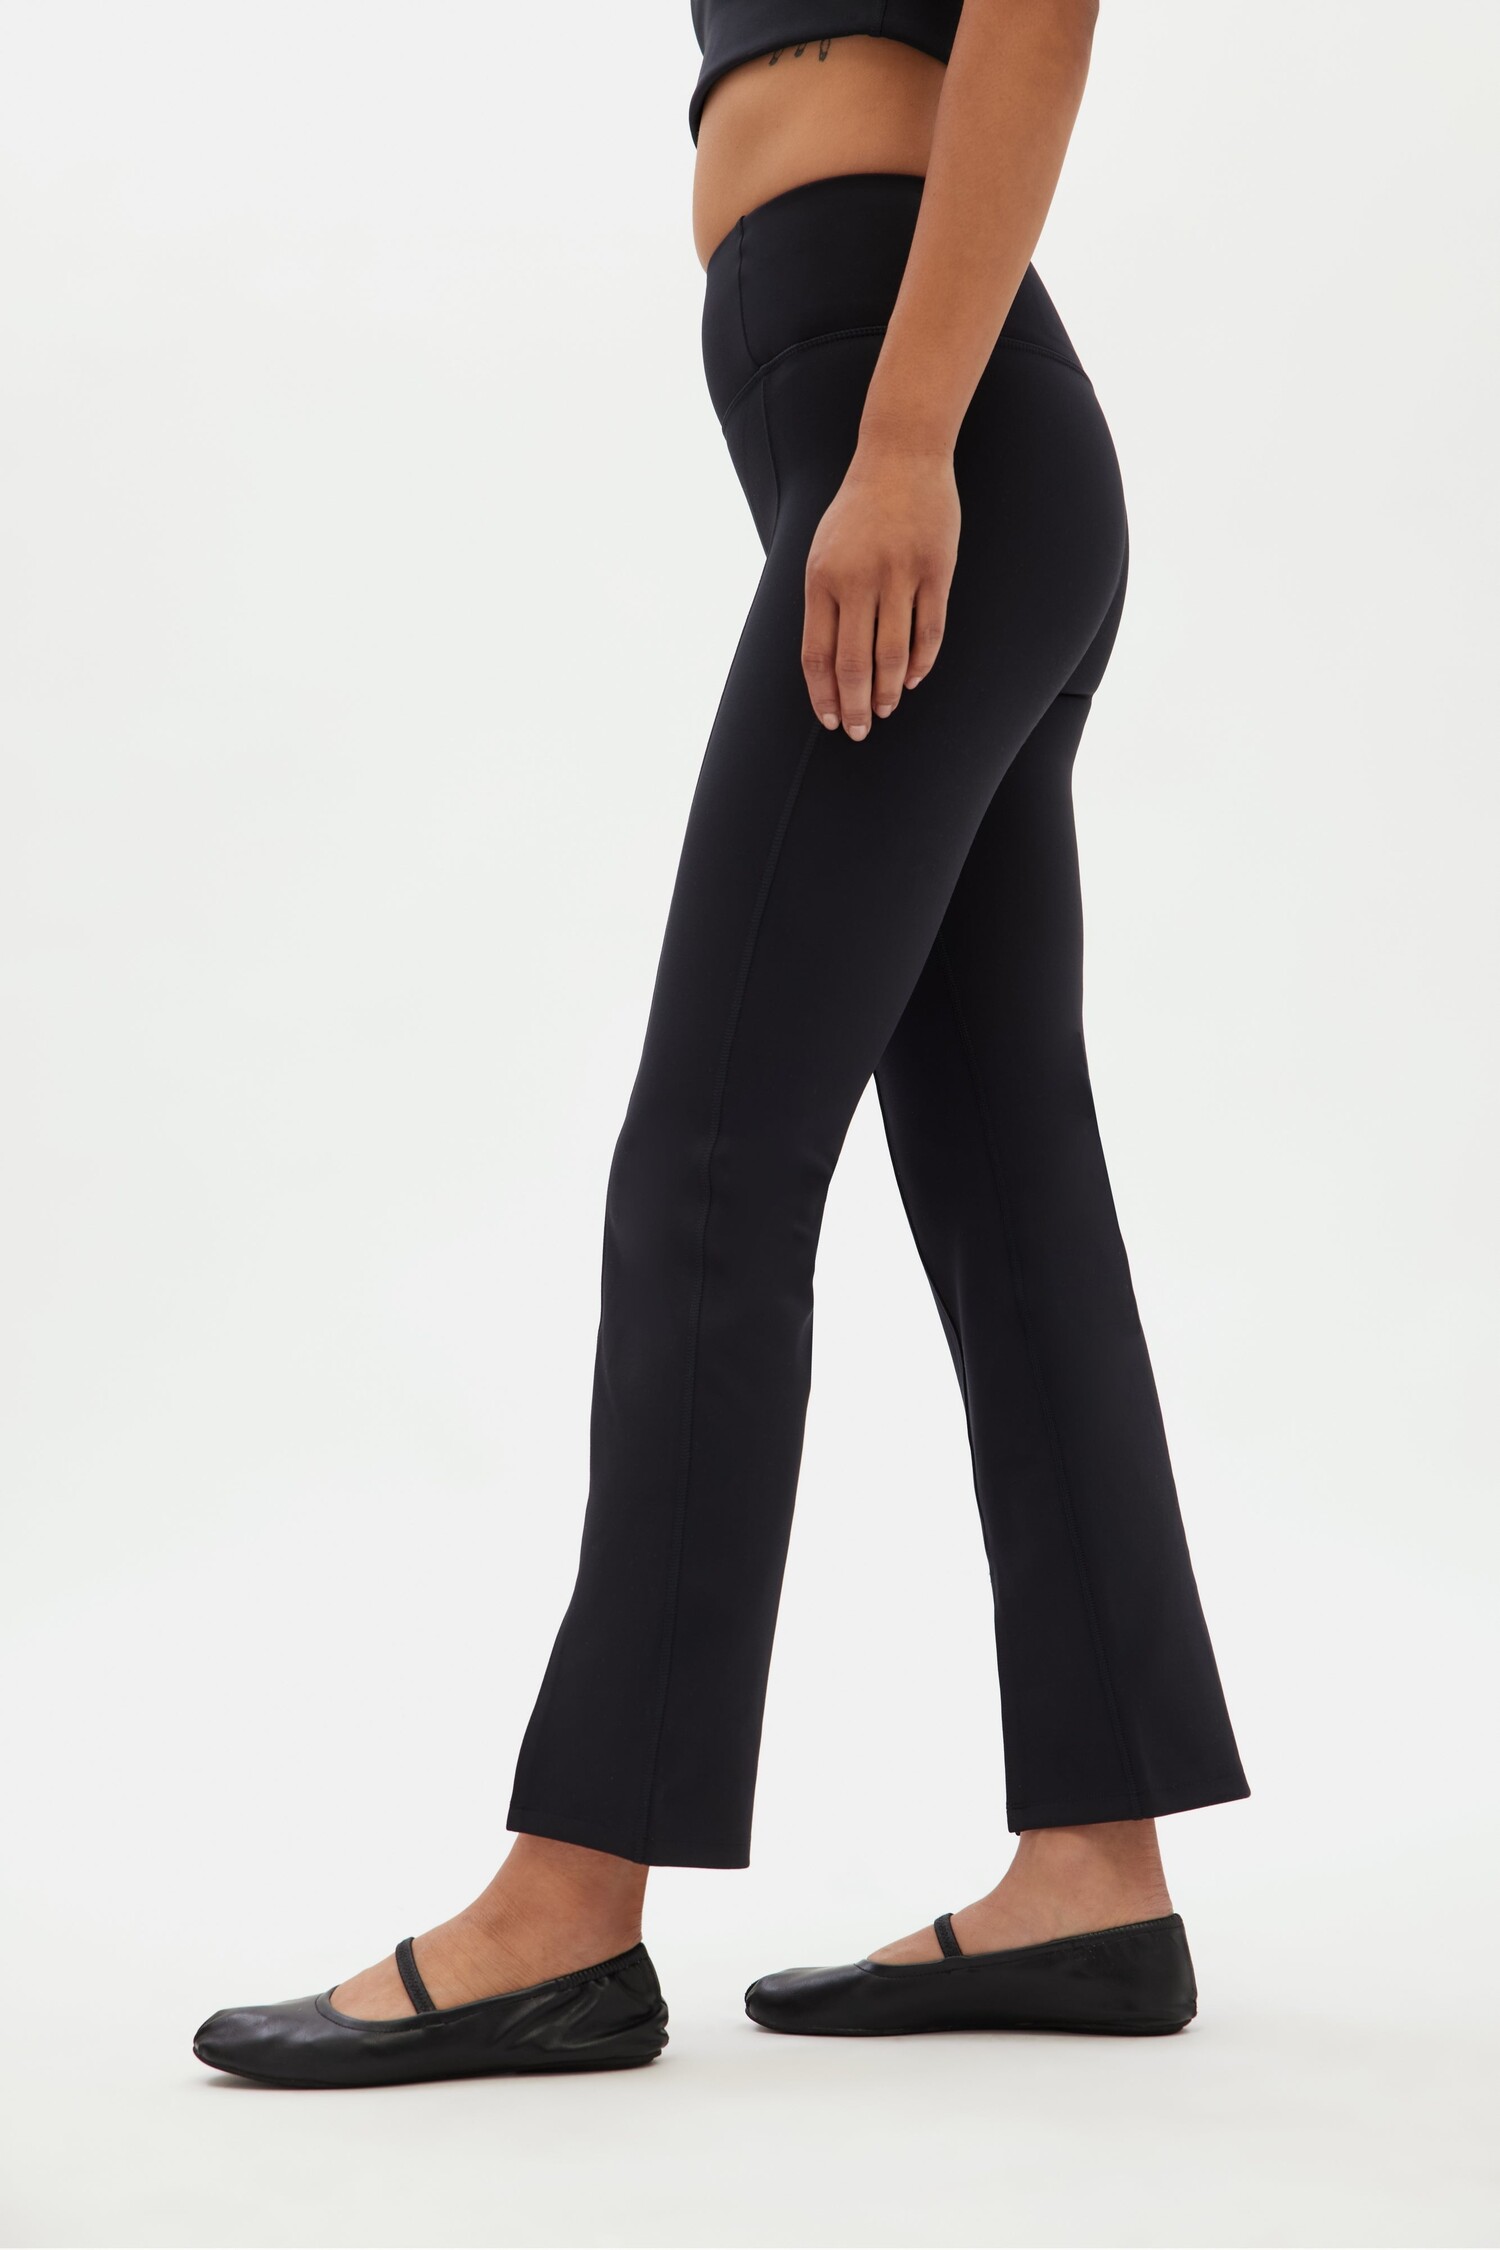 Girlfriend Collective Luxe Medium-Compression High-Rise Leggings